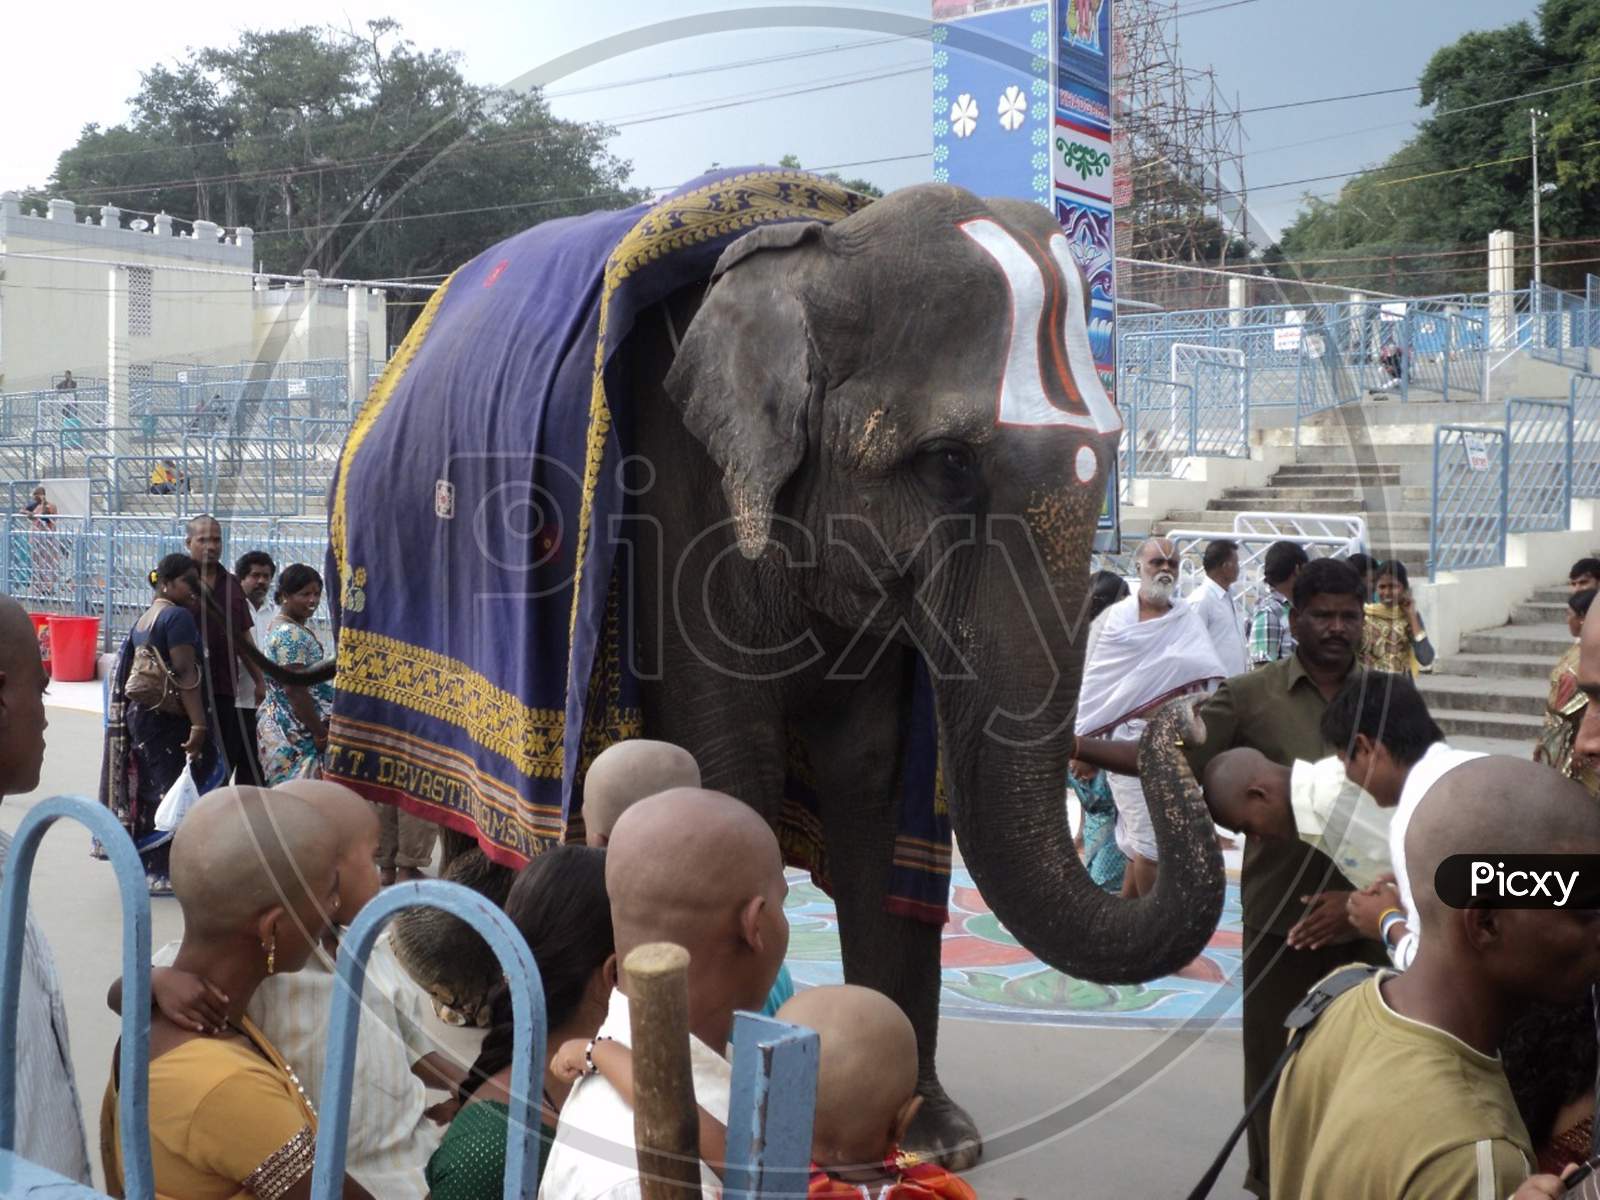 Temple Elephant at Tirupati balaji Temple.Its a Editorial Photo don't use it as a commercial photo.